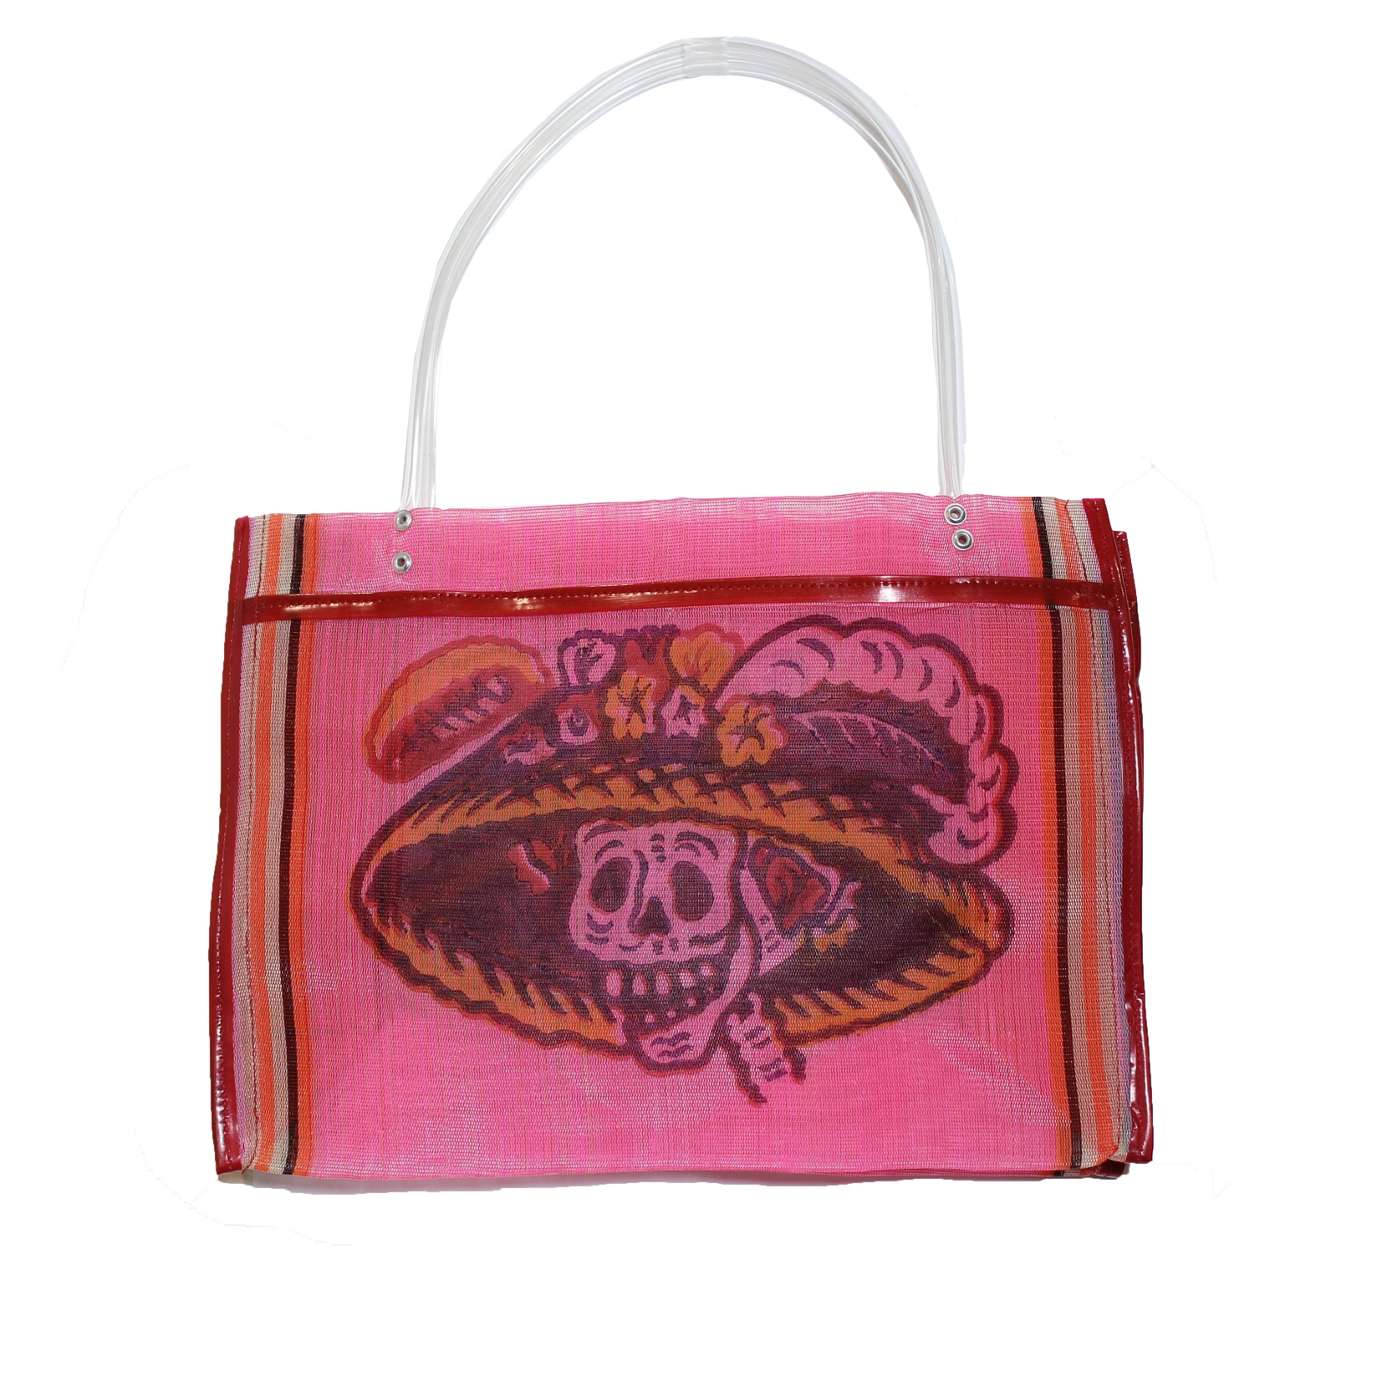 Blue Orange Pottery Day Of The Dead La Catrina Small Mesh Bag, Assorted Colors; image 2 of 6